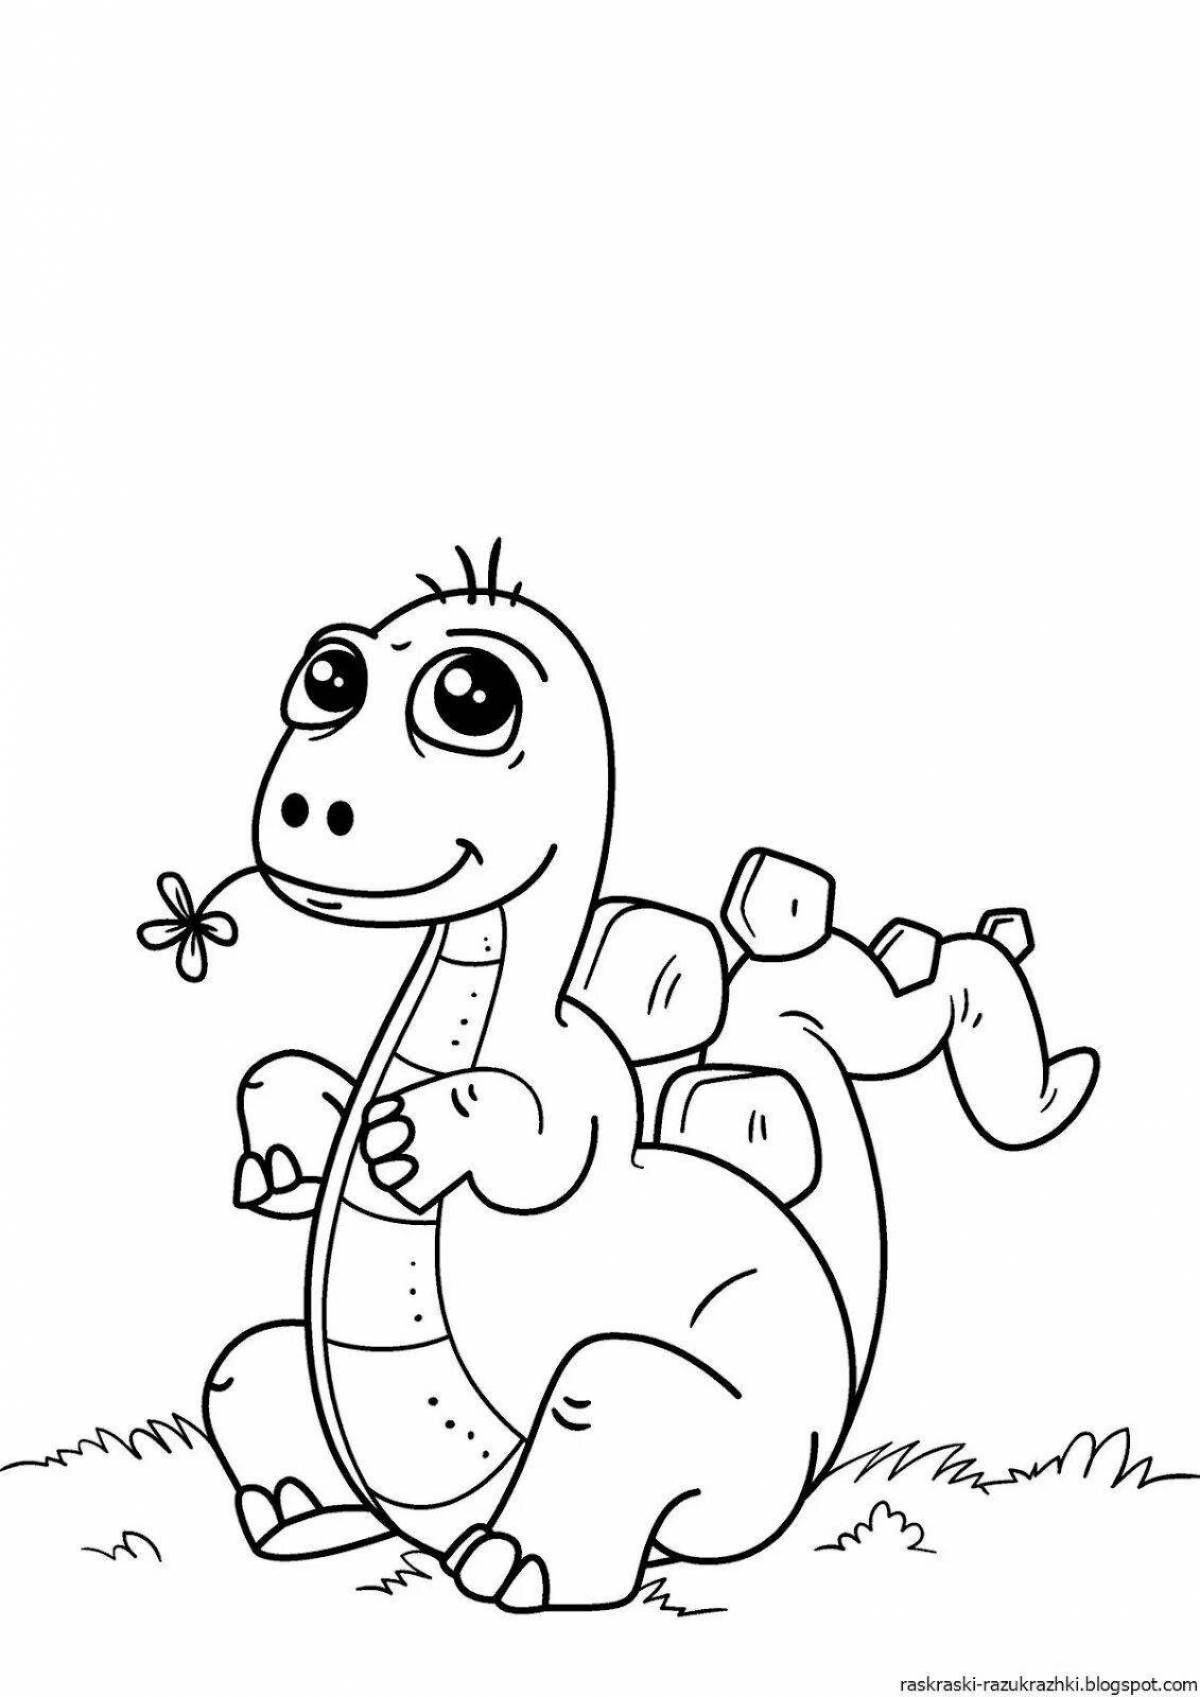 Fantastic dinosaurs coloring book for 4-5 year olds